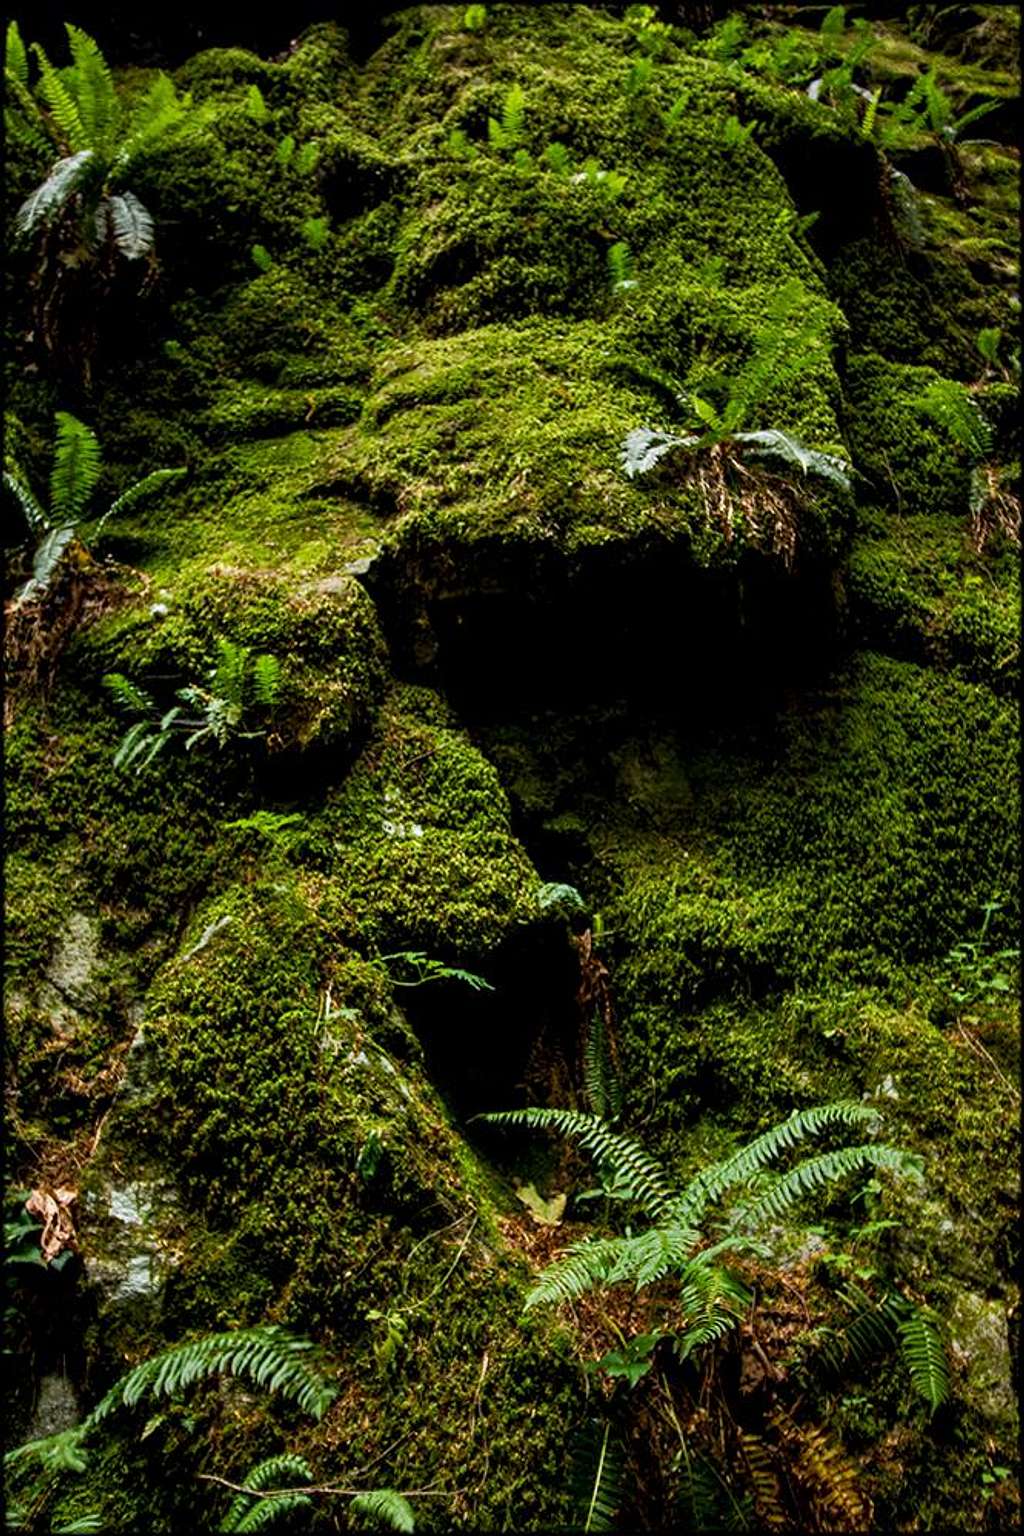 The mossy wall